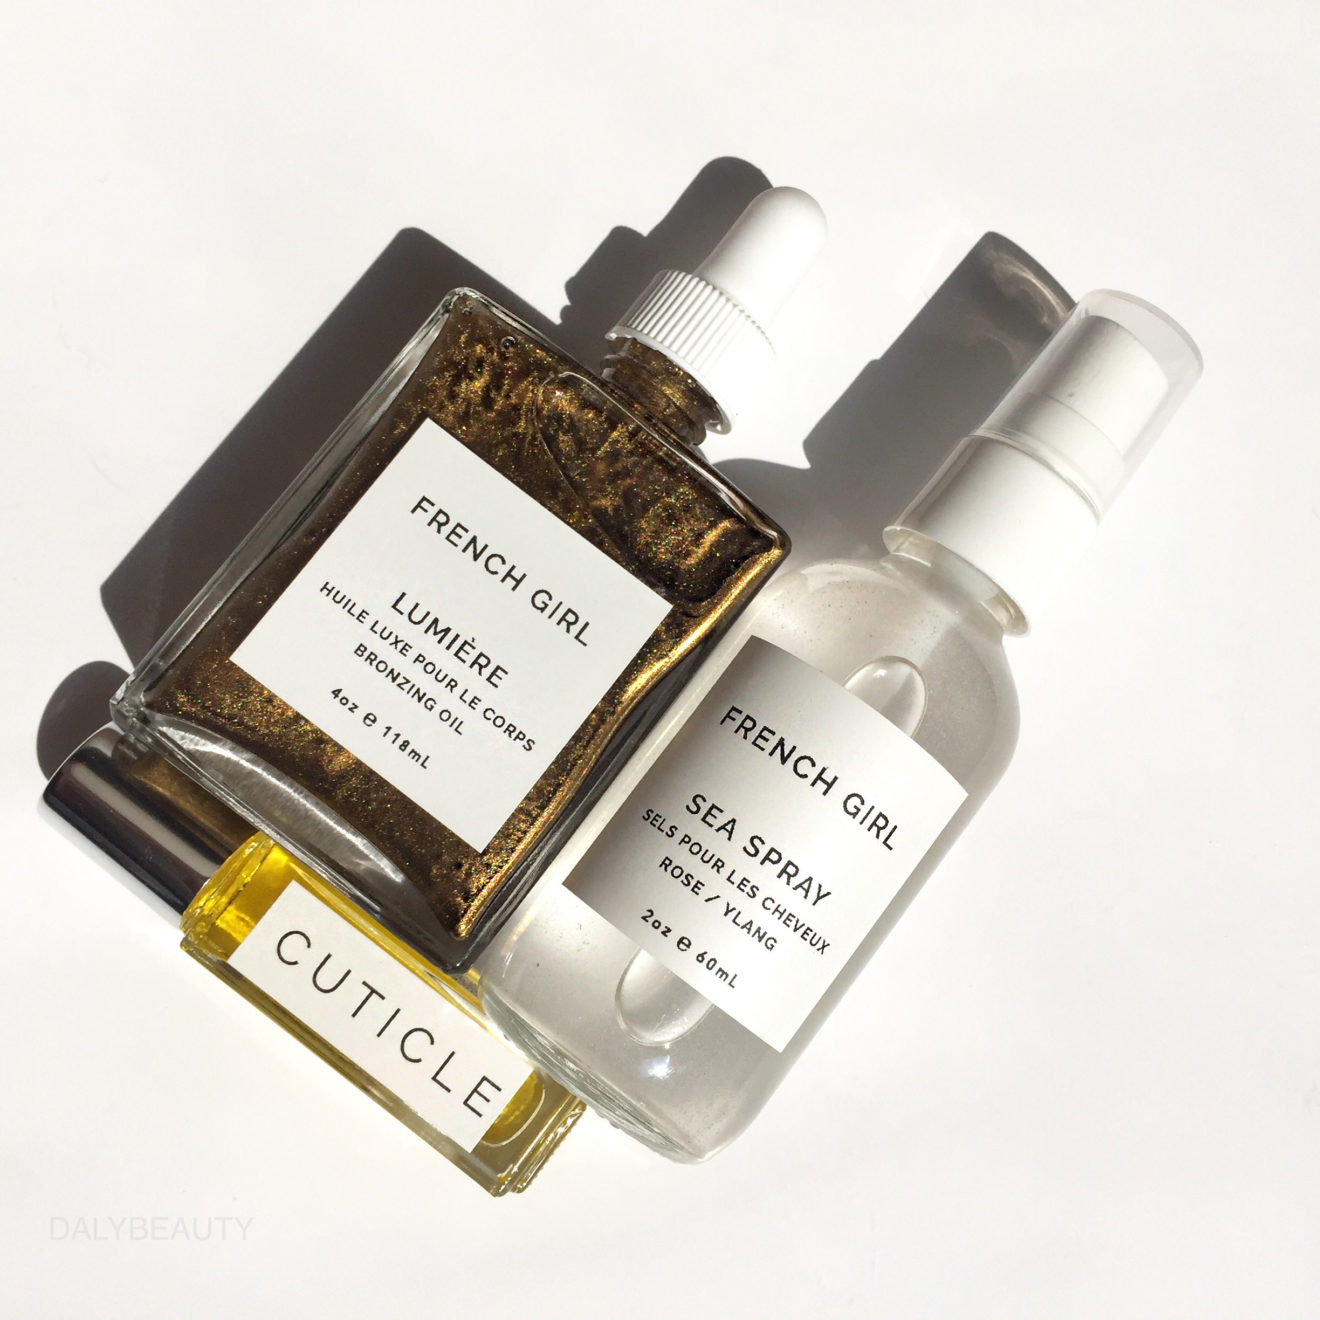 Next Level Clean Beauty: French Girl Organics is Cool And Gorgeous